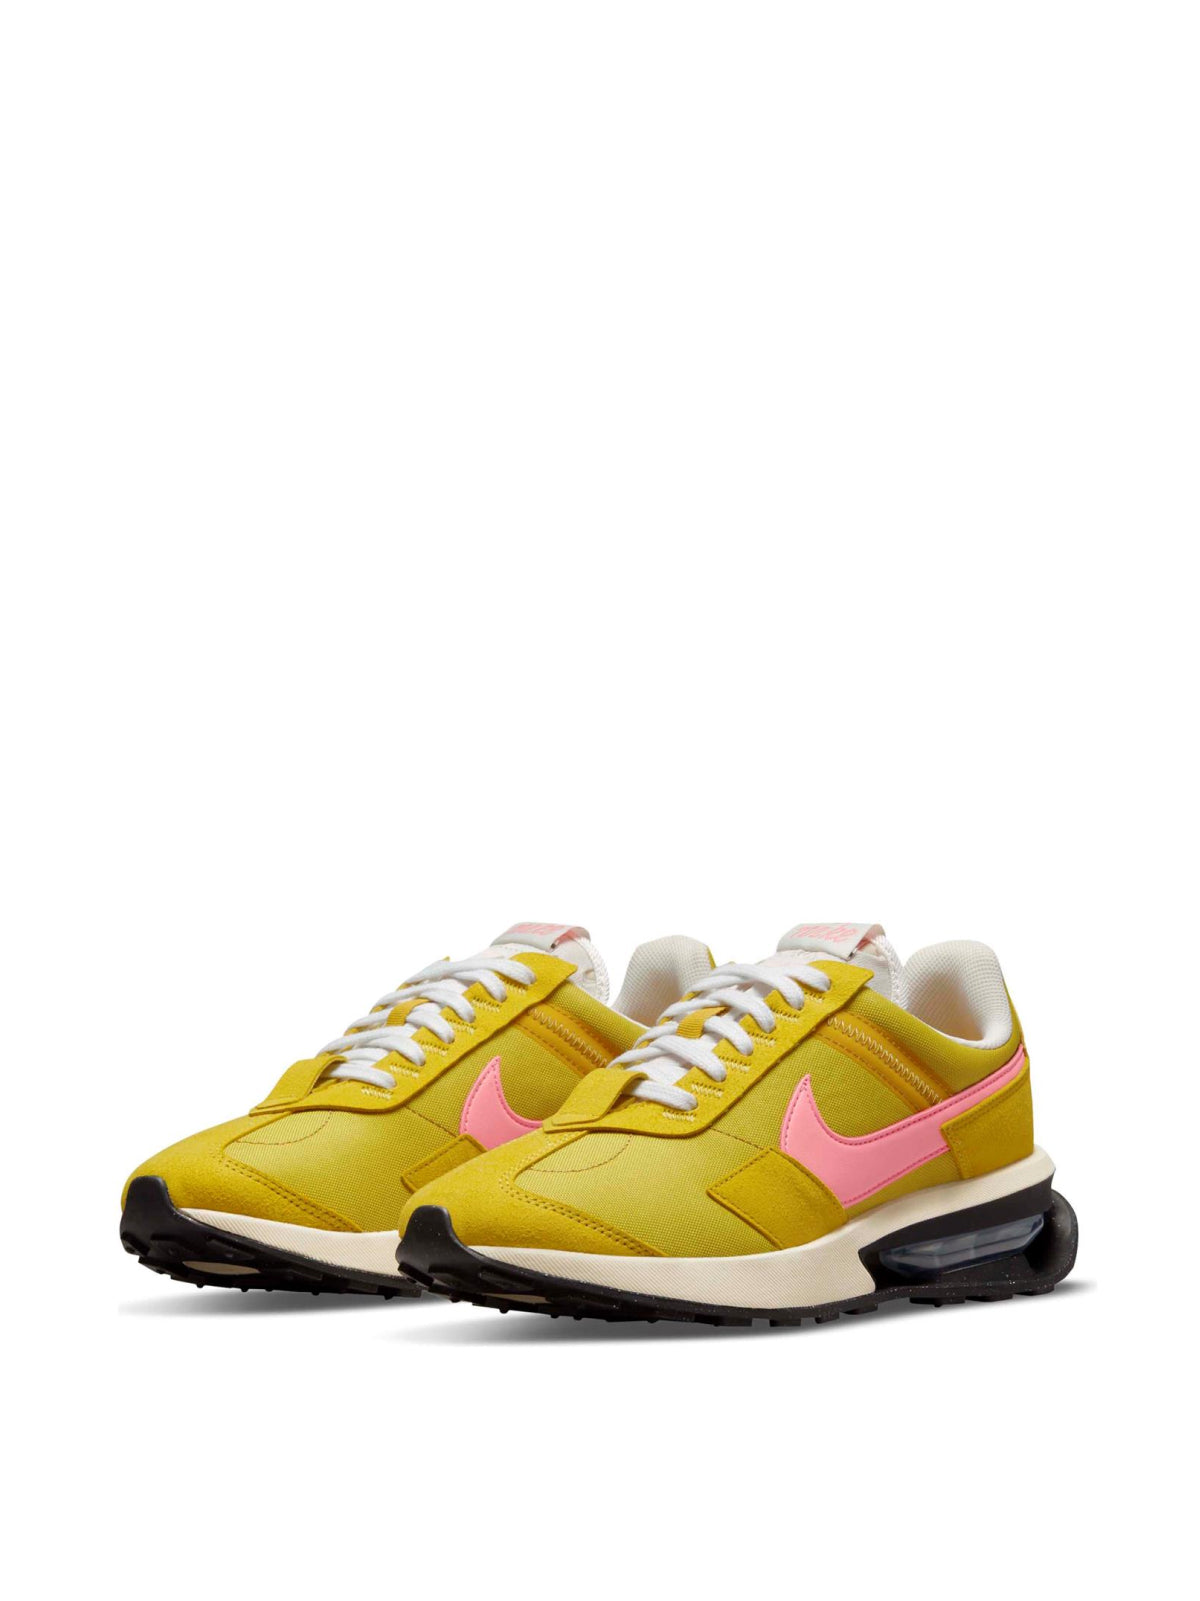 Nike-OUTLET-SALE-Air Max Pre Day LX Sneakers-ARCHIVIST